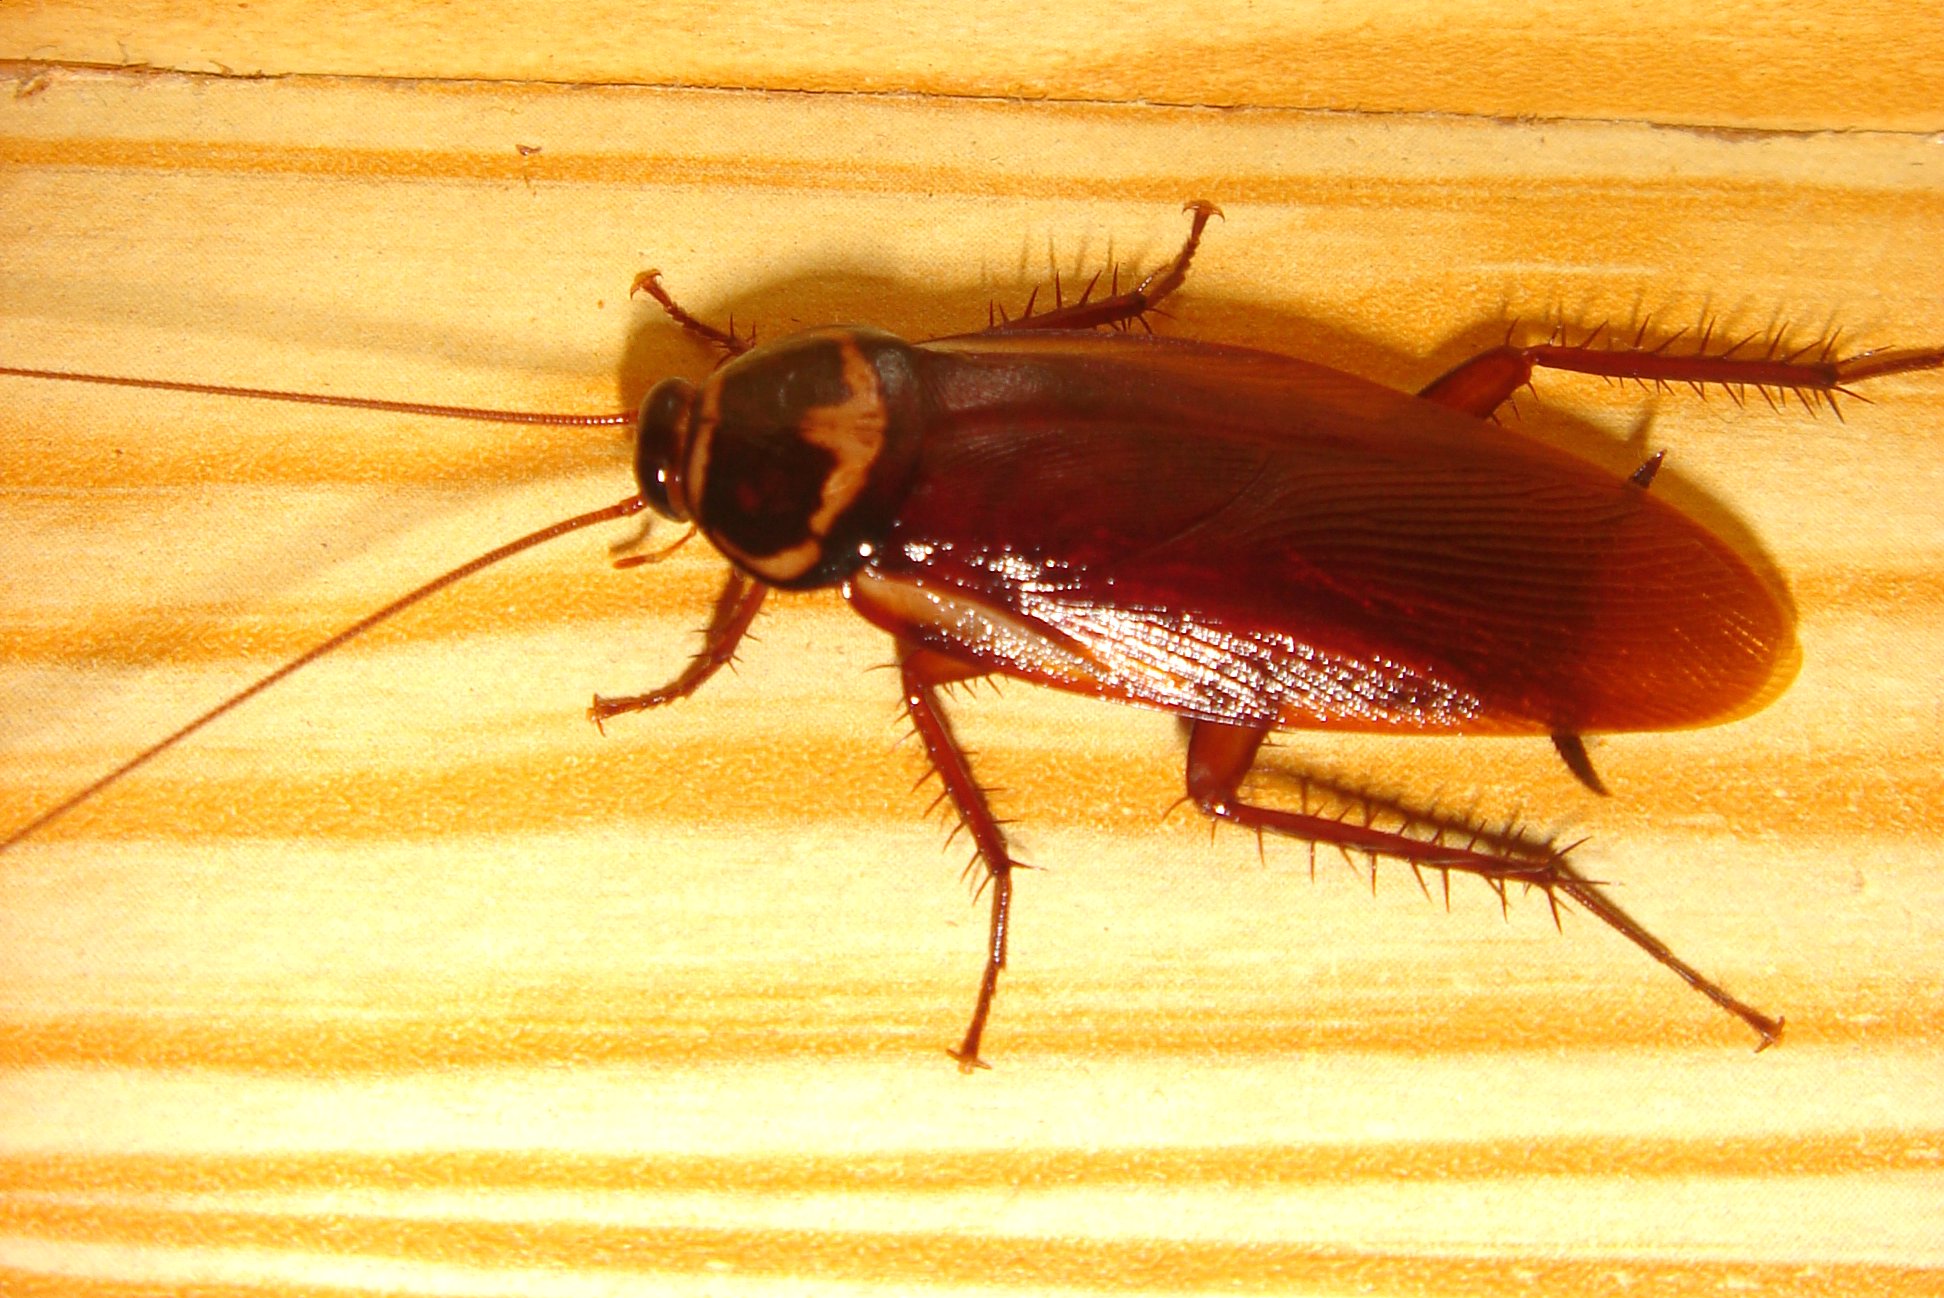 Cockroach Milk Soon Will Soon Be on the Menu as a Superfood